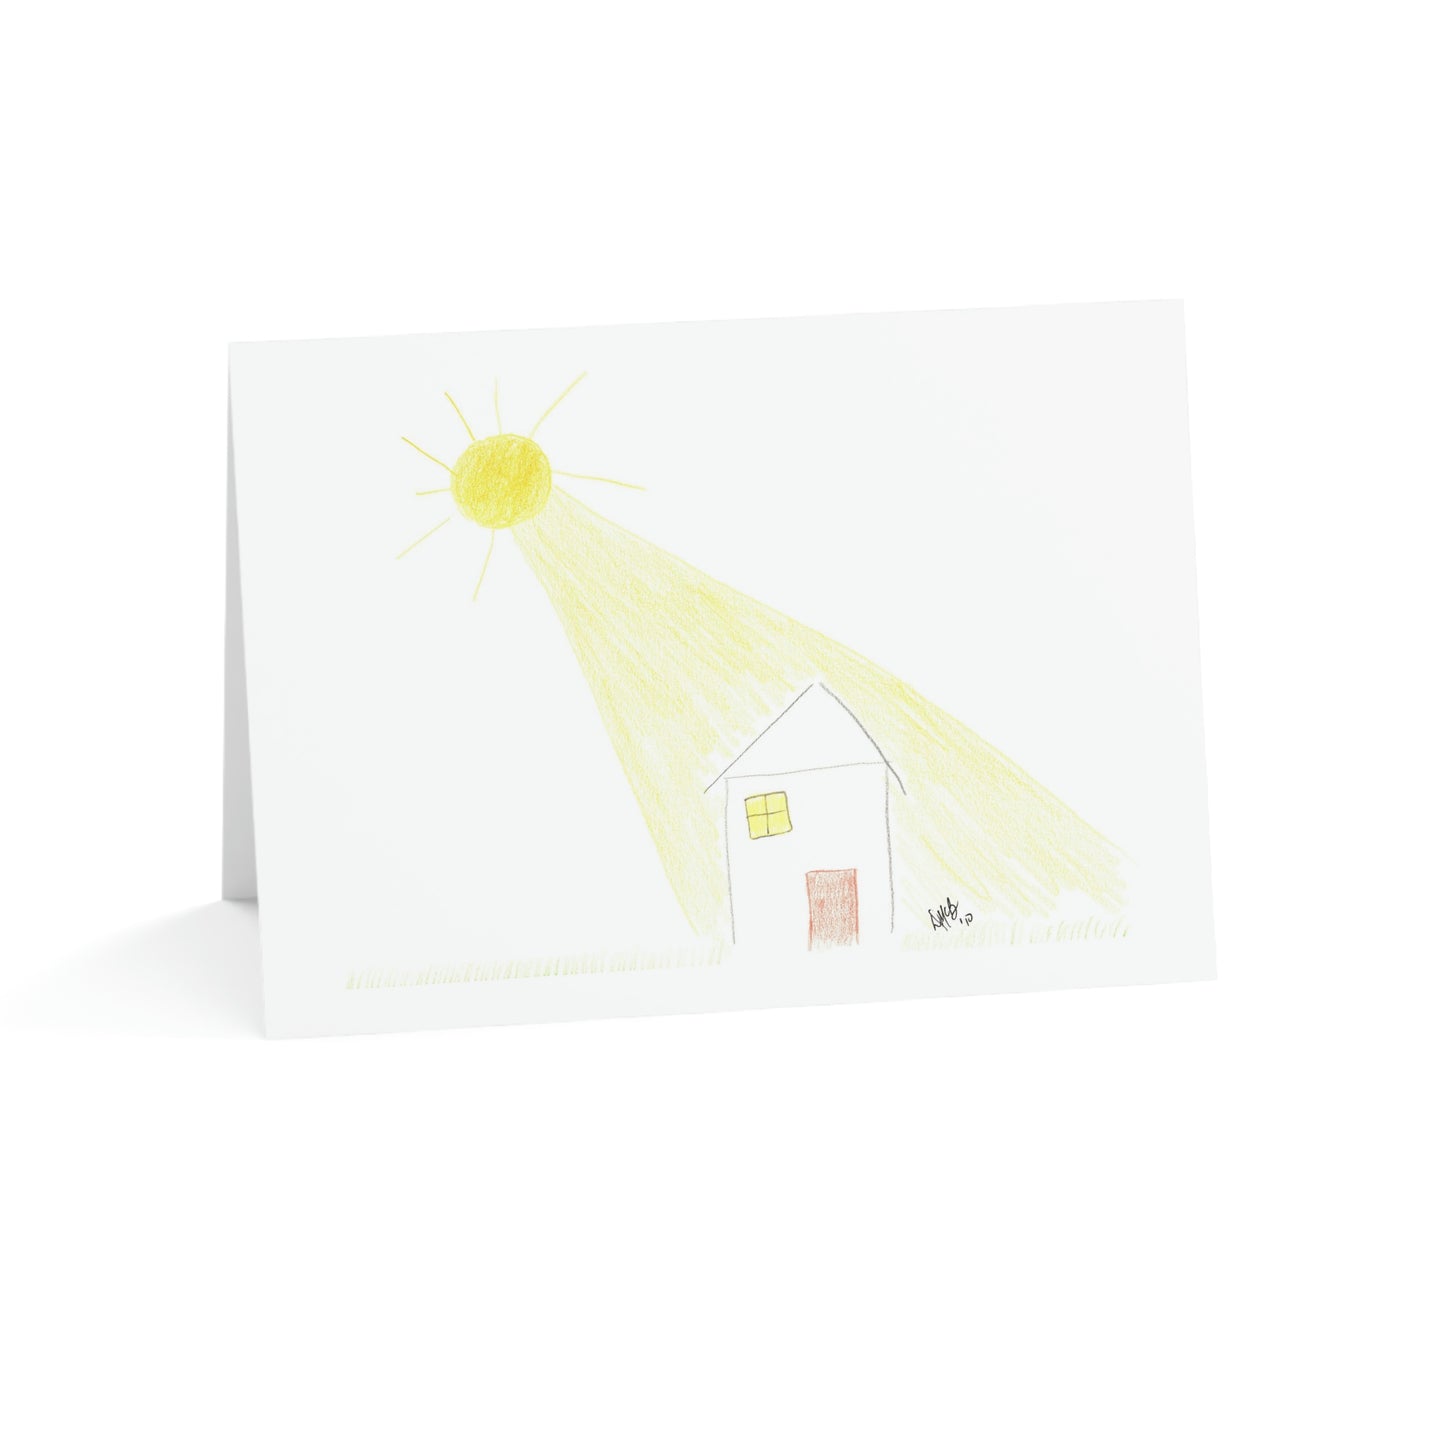 Thinking of You - Sending You a Ray of Sunshine - Greeting Cards (1, 10, 30, and 50pcs)